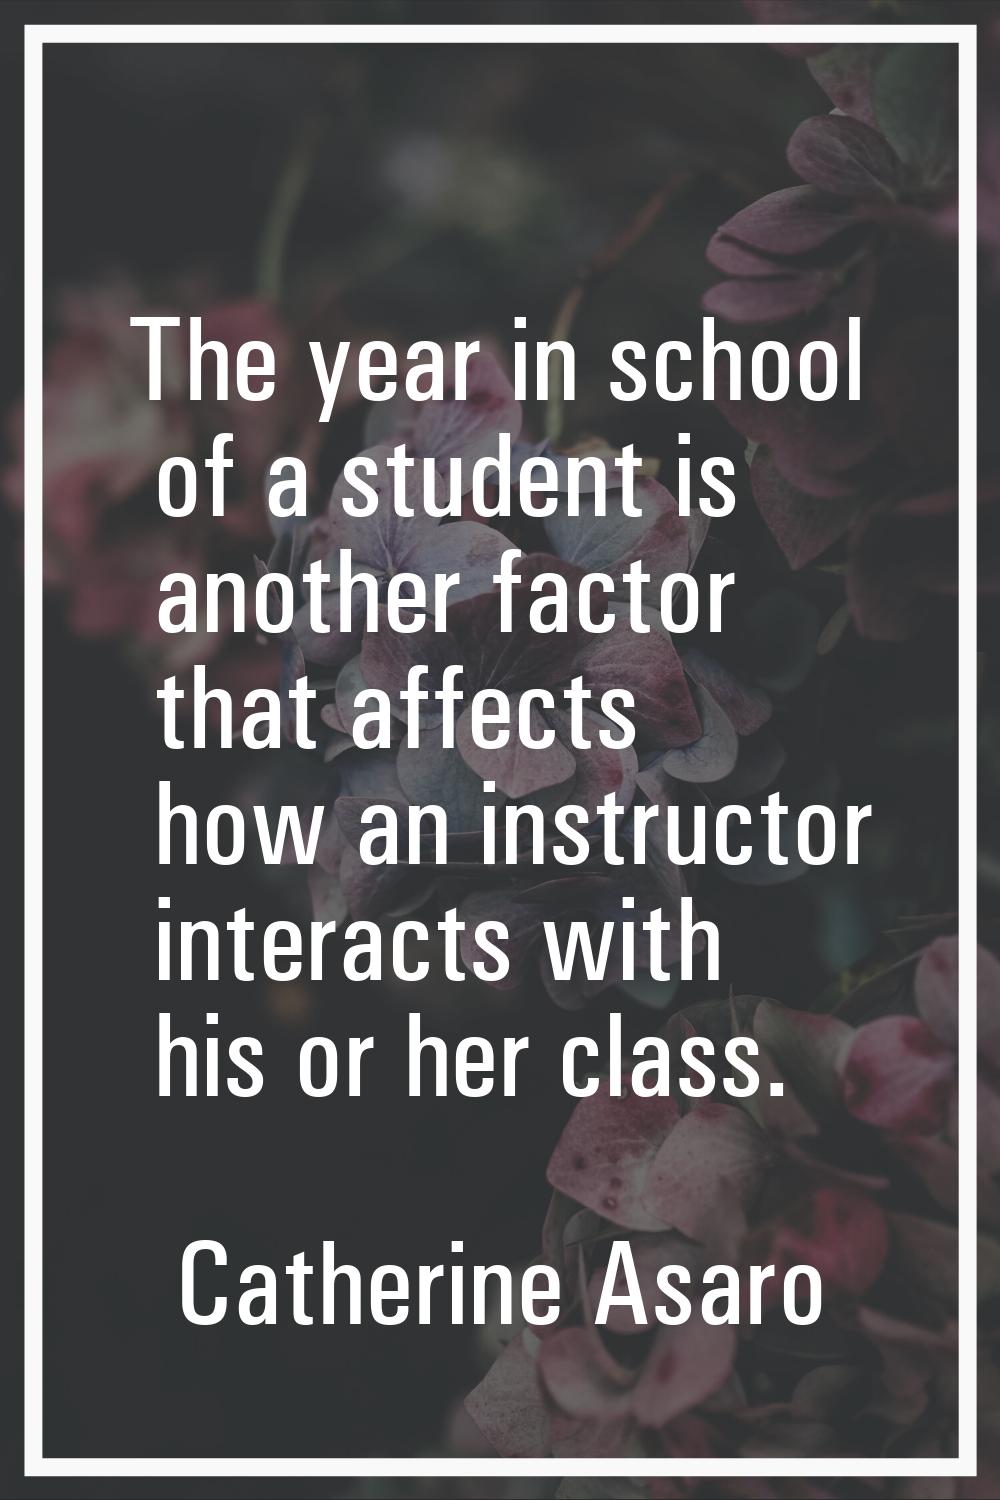 The year in school of a student is another factor that affects how an instructor interacts with his